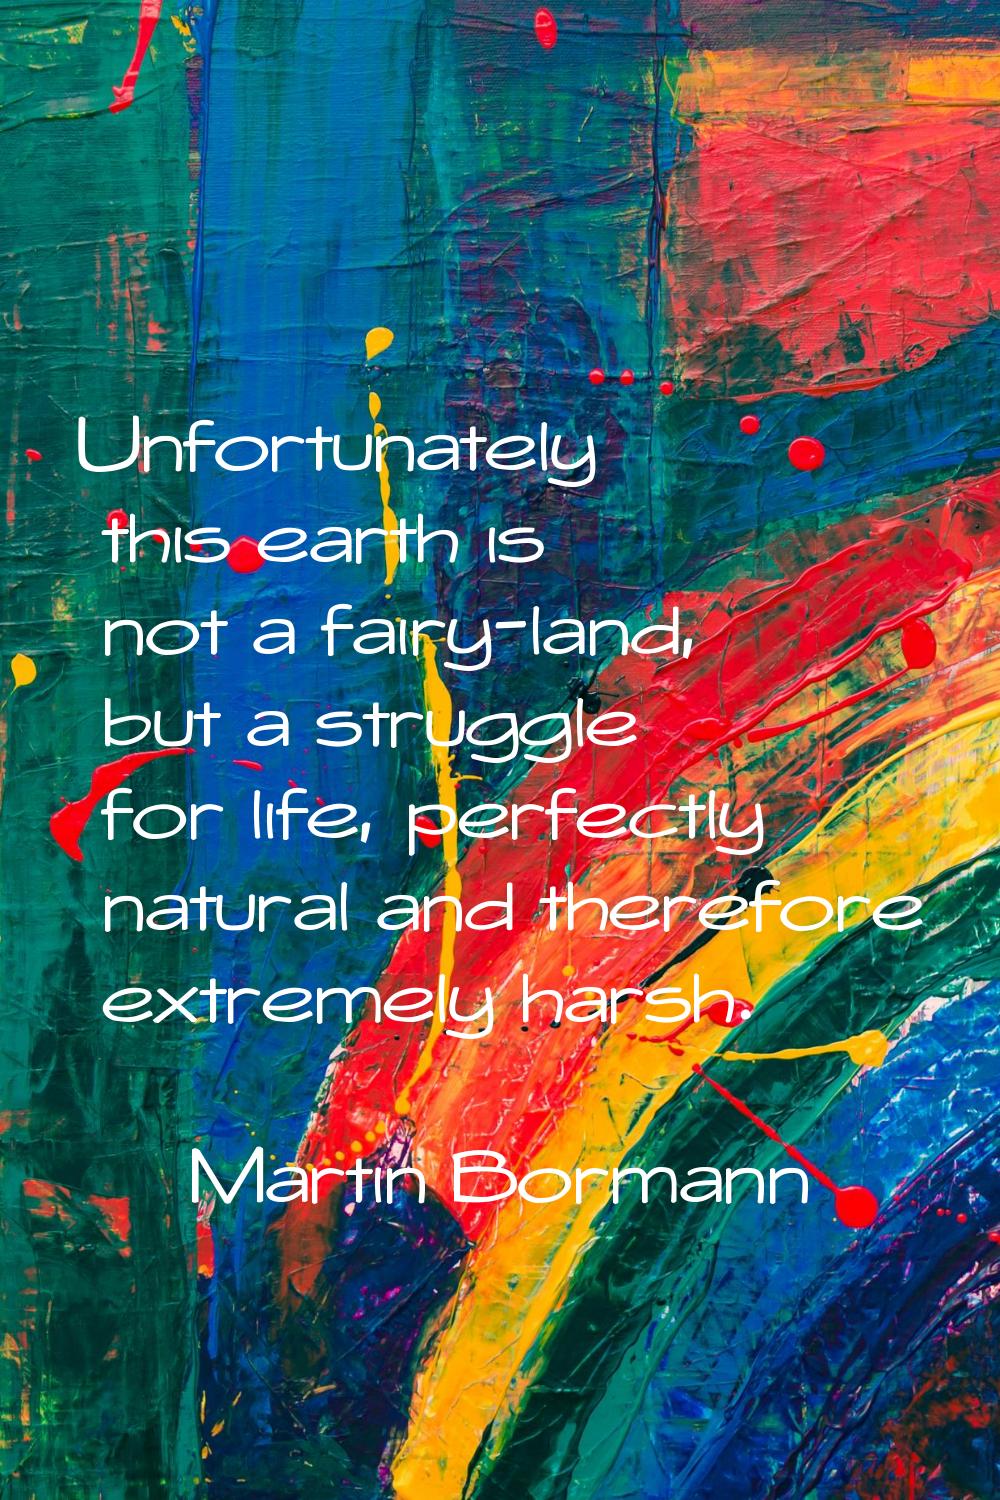 Unfortunately this earth is not a fairy-land, but a struggle for life, perfectly natural and theref